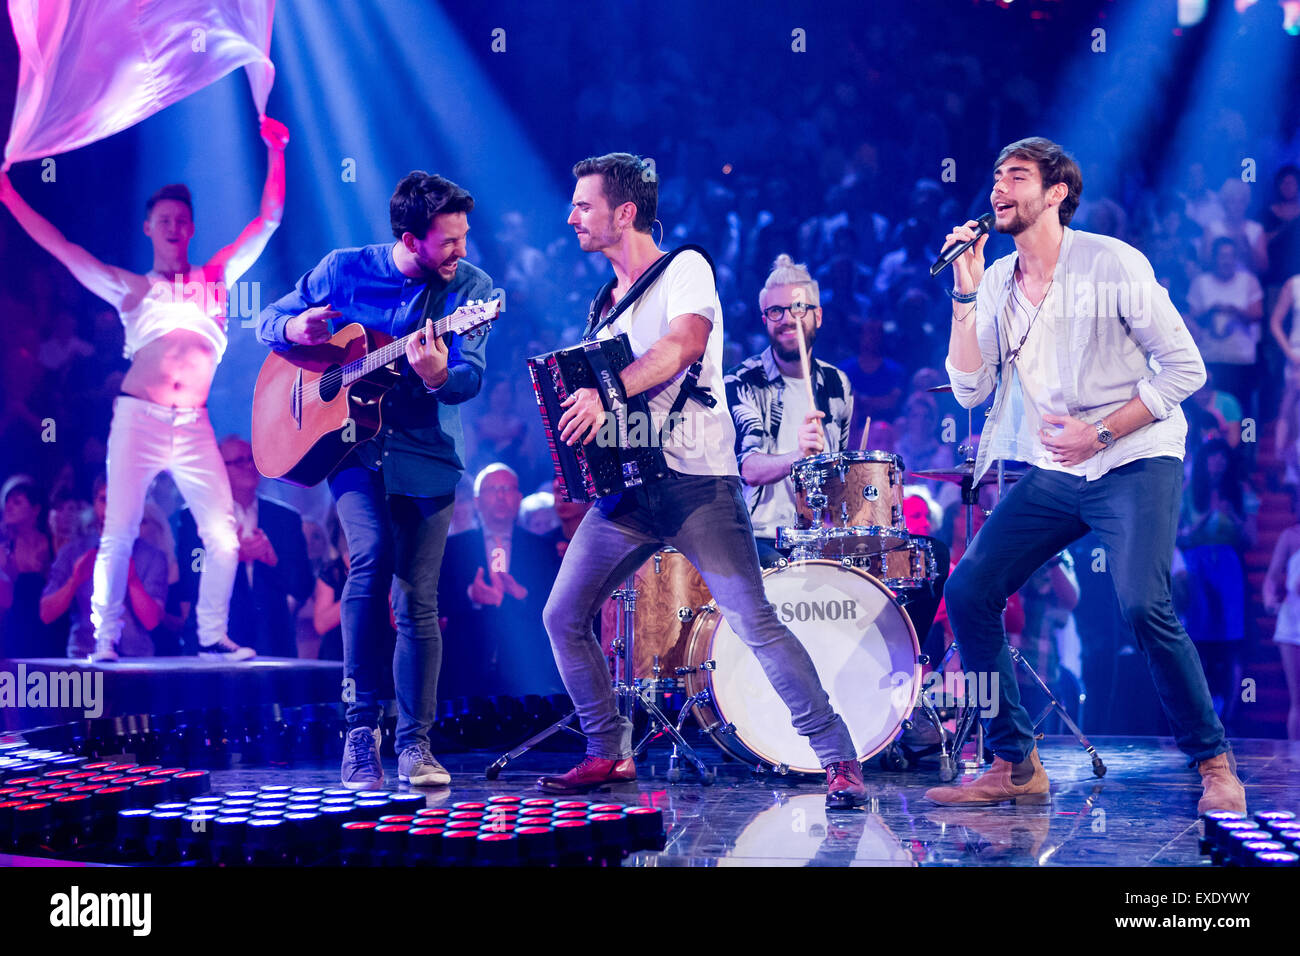 Riesa, Germany. 11th July, 2015. The band 'El mismo sol' performs together with TV host Florian Silbereisen during the TV live show 'Die Besten im Sommer' (lit. The best in summer) at the Erdgasarena in Riesa, Germany, 11 July 2015. Photo: Andreas Lander/dpa - NO WIRE SERVICE -/dpa/Alamy Live News Stock Photo